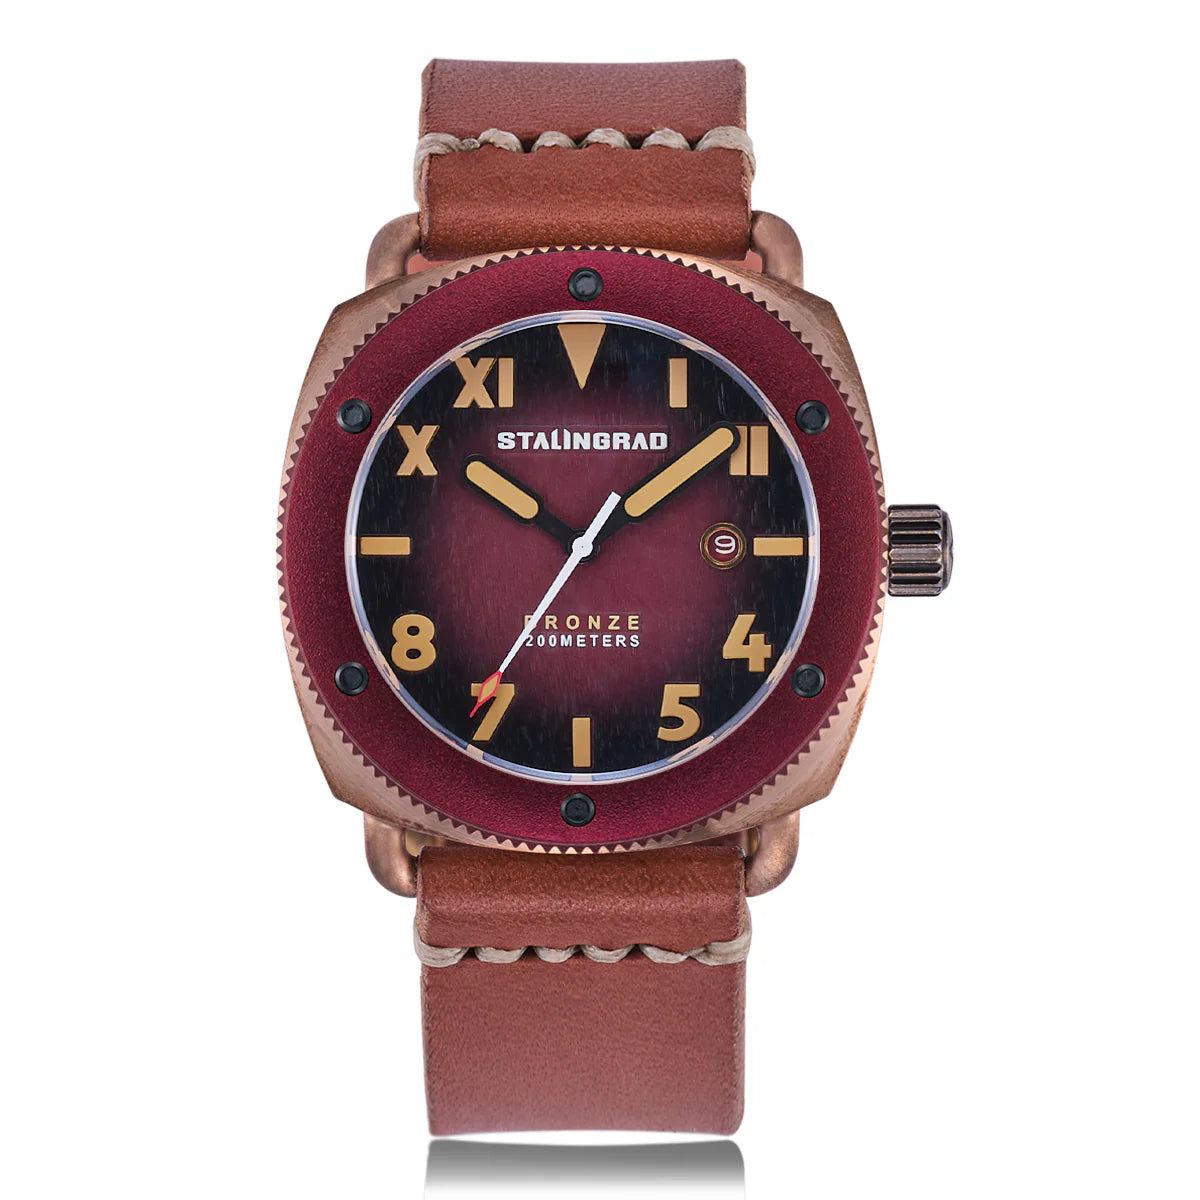 Bronze Defender 200M. Red Dial. Brown Leather Strap